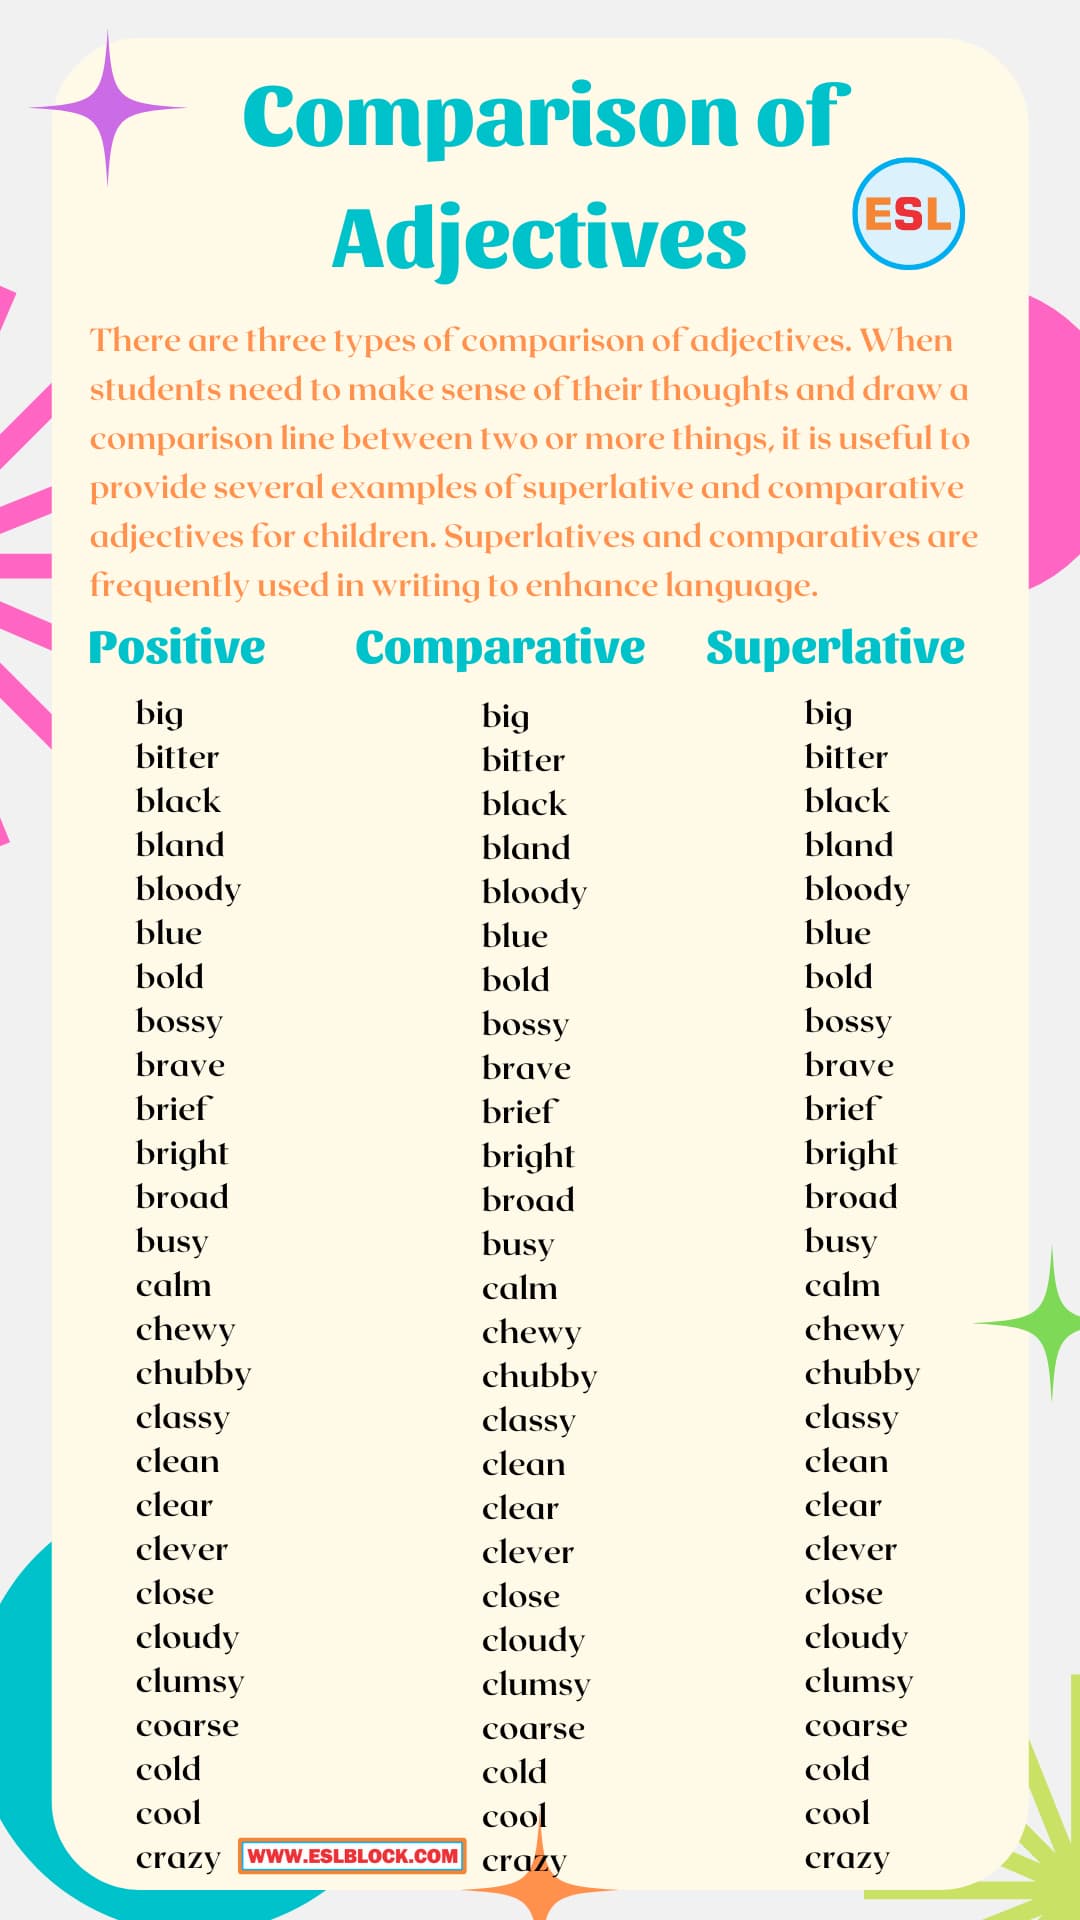 Adjective Words, Adjectives, Comparative Adjectives, Comparative and Superlative Adjectives, Comparison Adjectives, Comparison of Adjectives, Forming Comparatives, General Rules in Forming Comparison of Adjectives, List of Comparison Adjectives, List of Useful Comparison Adjectives in English, Proper Comparison Adjectives, Simple Comparison Adjectives, Superlative Adjectives, Three Forms of Comparison of Adjectives in English, What are Comparison Adjectives, What is Comparison of Adjectives